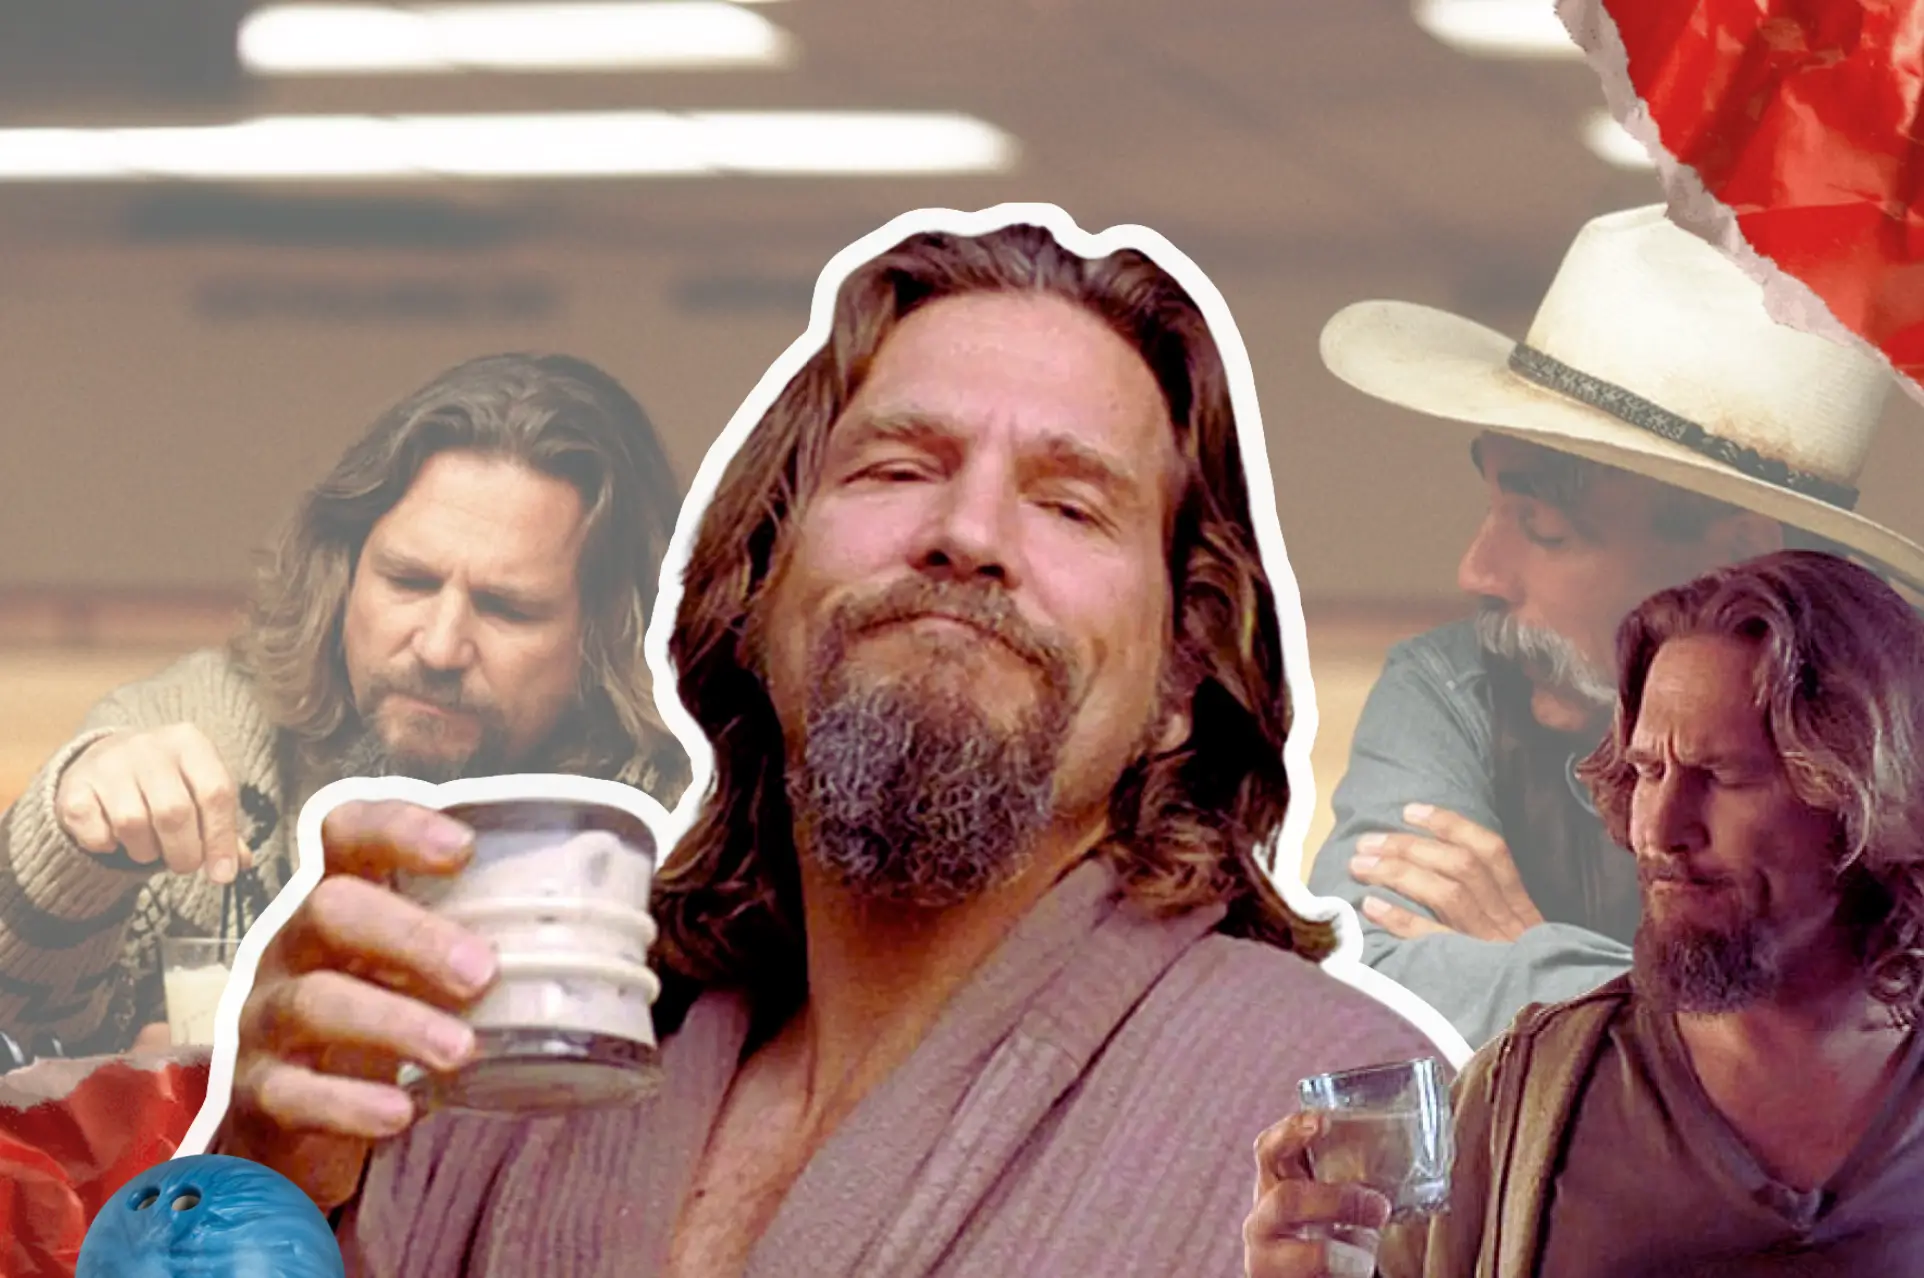 The Big Lebowski OWNS the White Russian